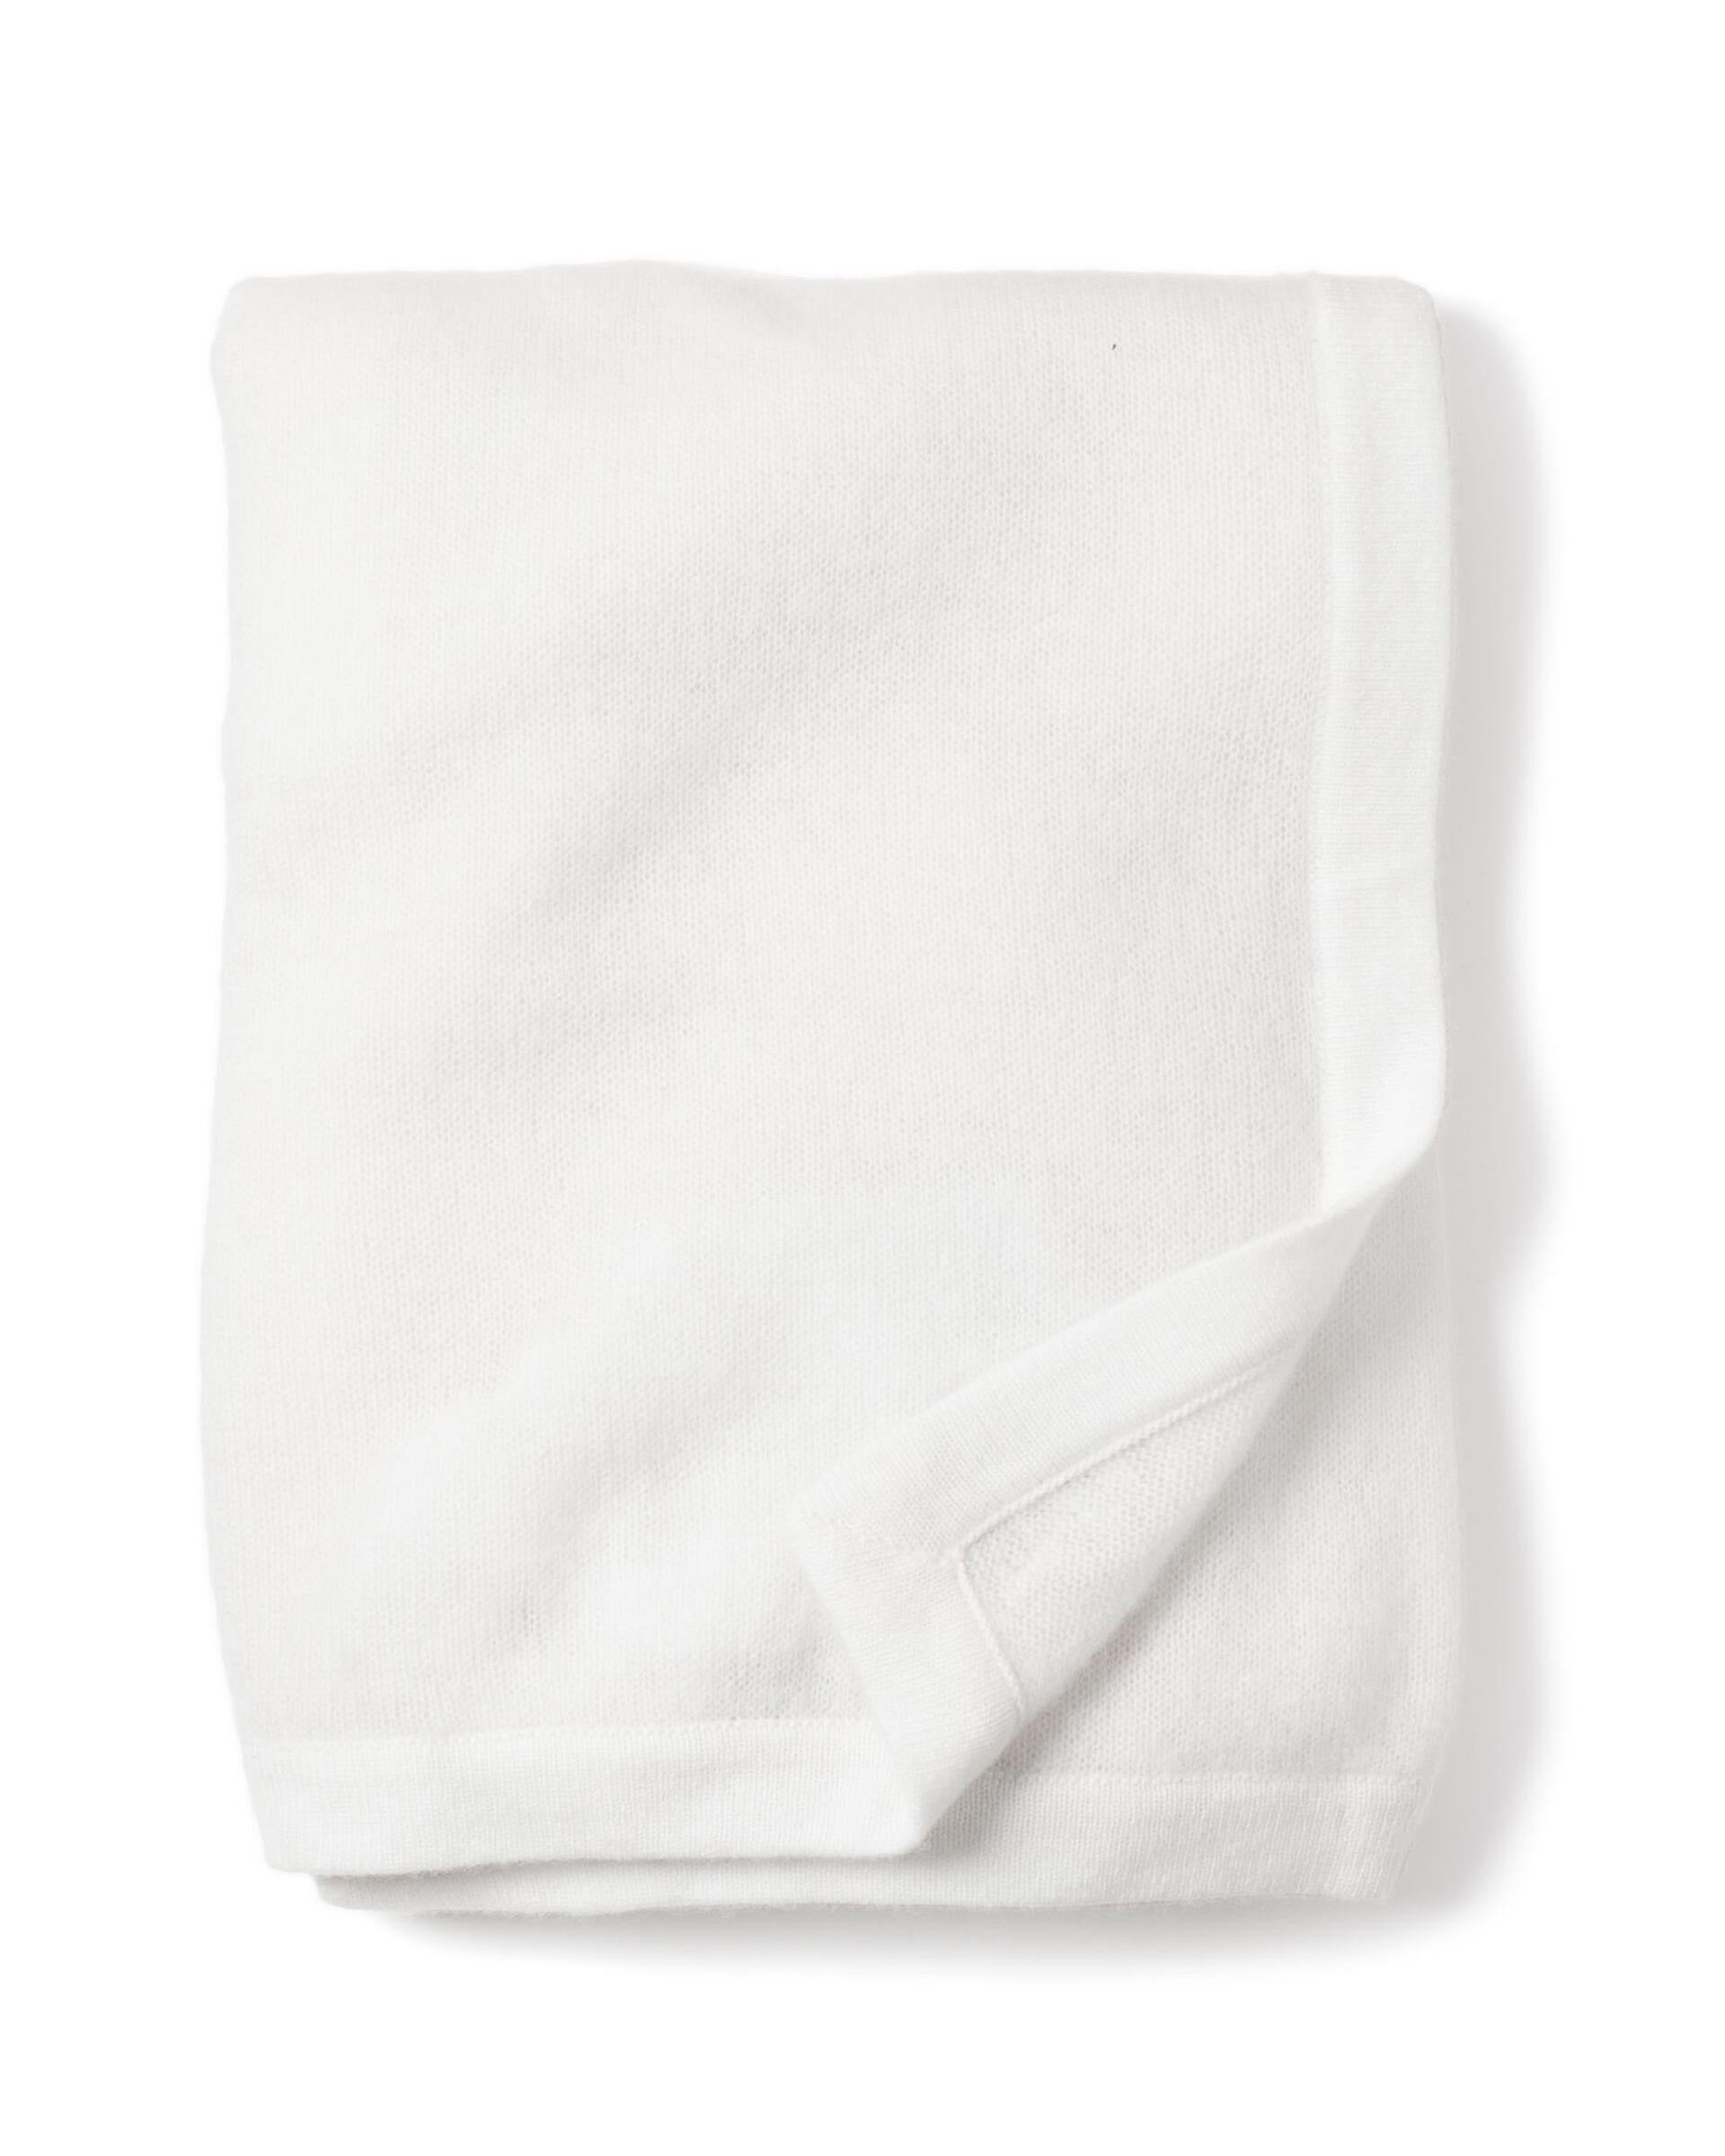 100% Cashmere Baby Blanket in Ivory - Petite Plume